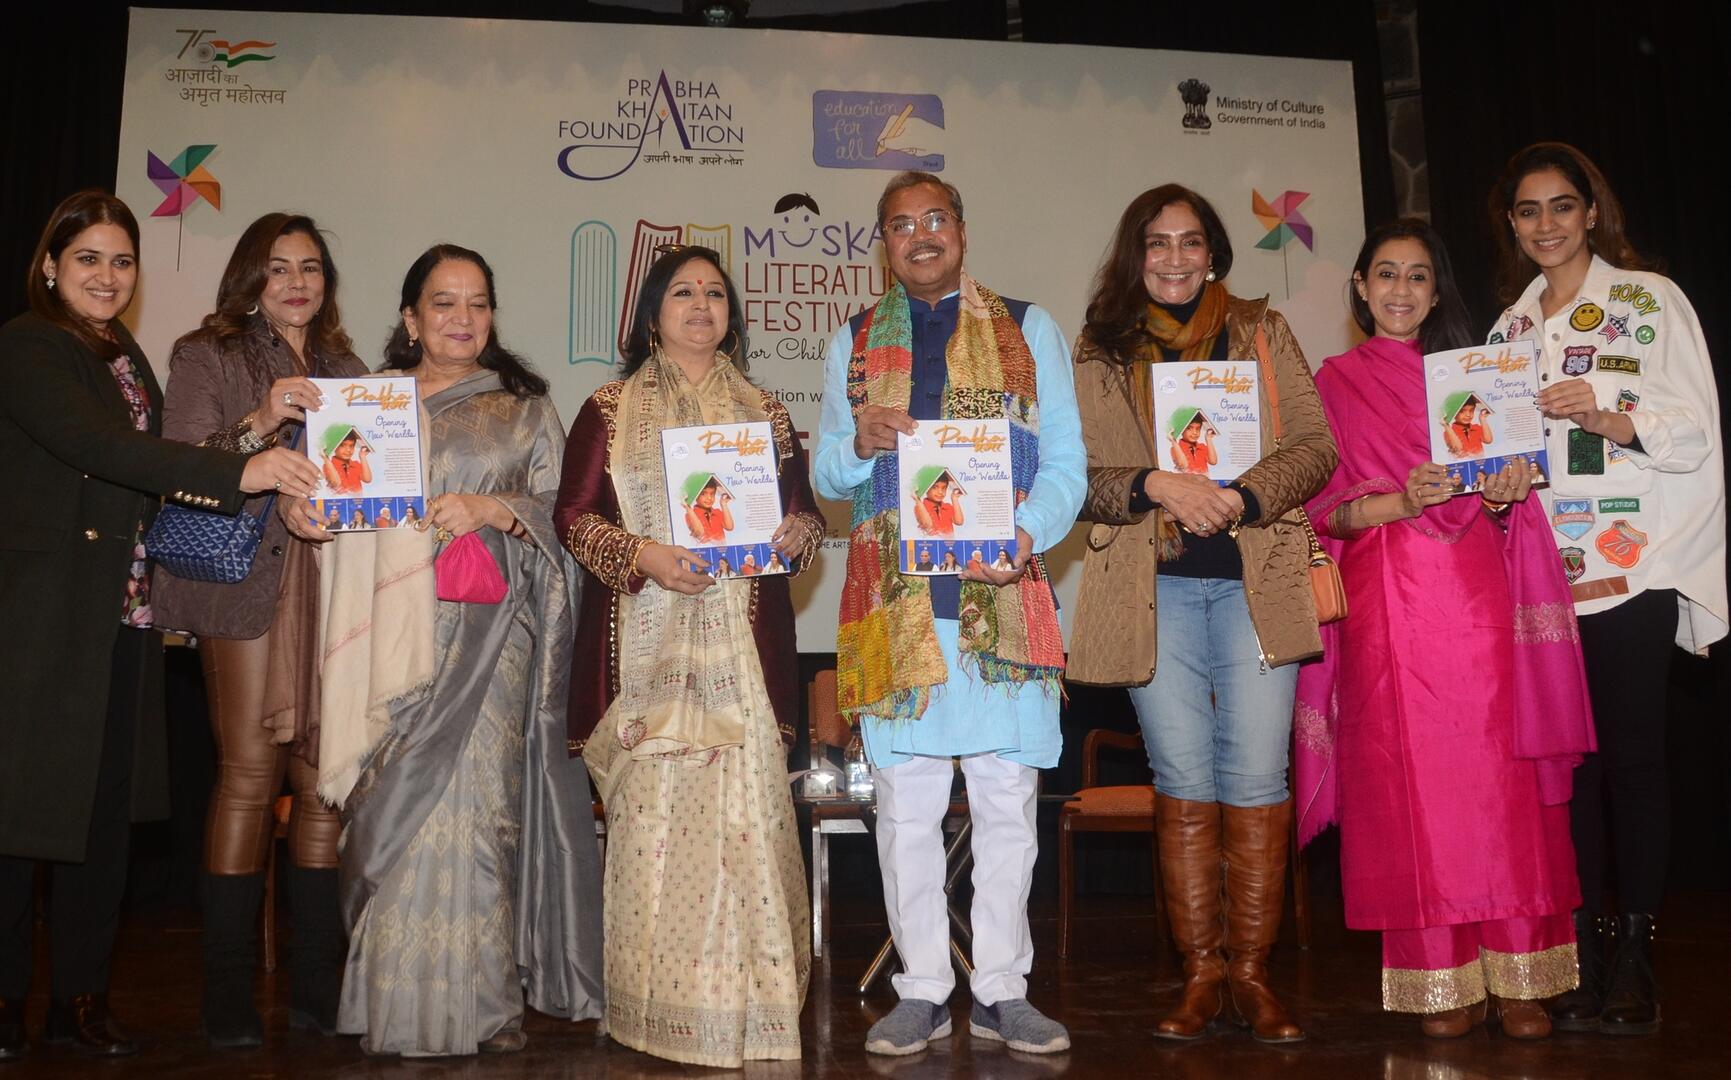 30 young authors of India get a forum to showcase  literary talent at the Muskaan Litfest for Child Authors